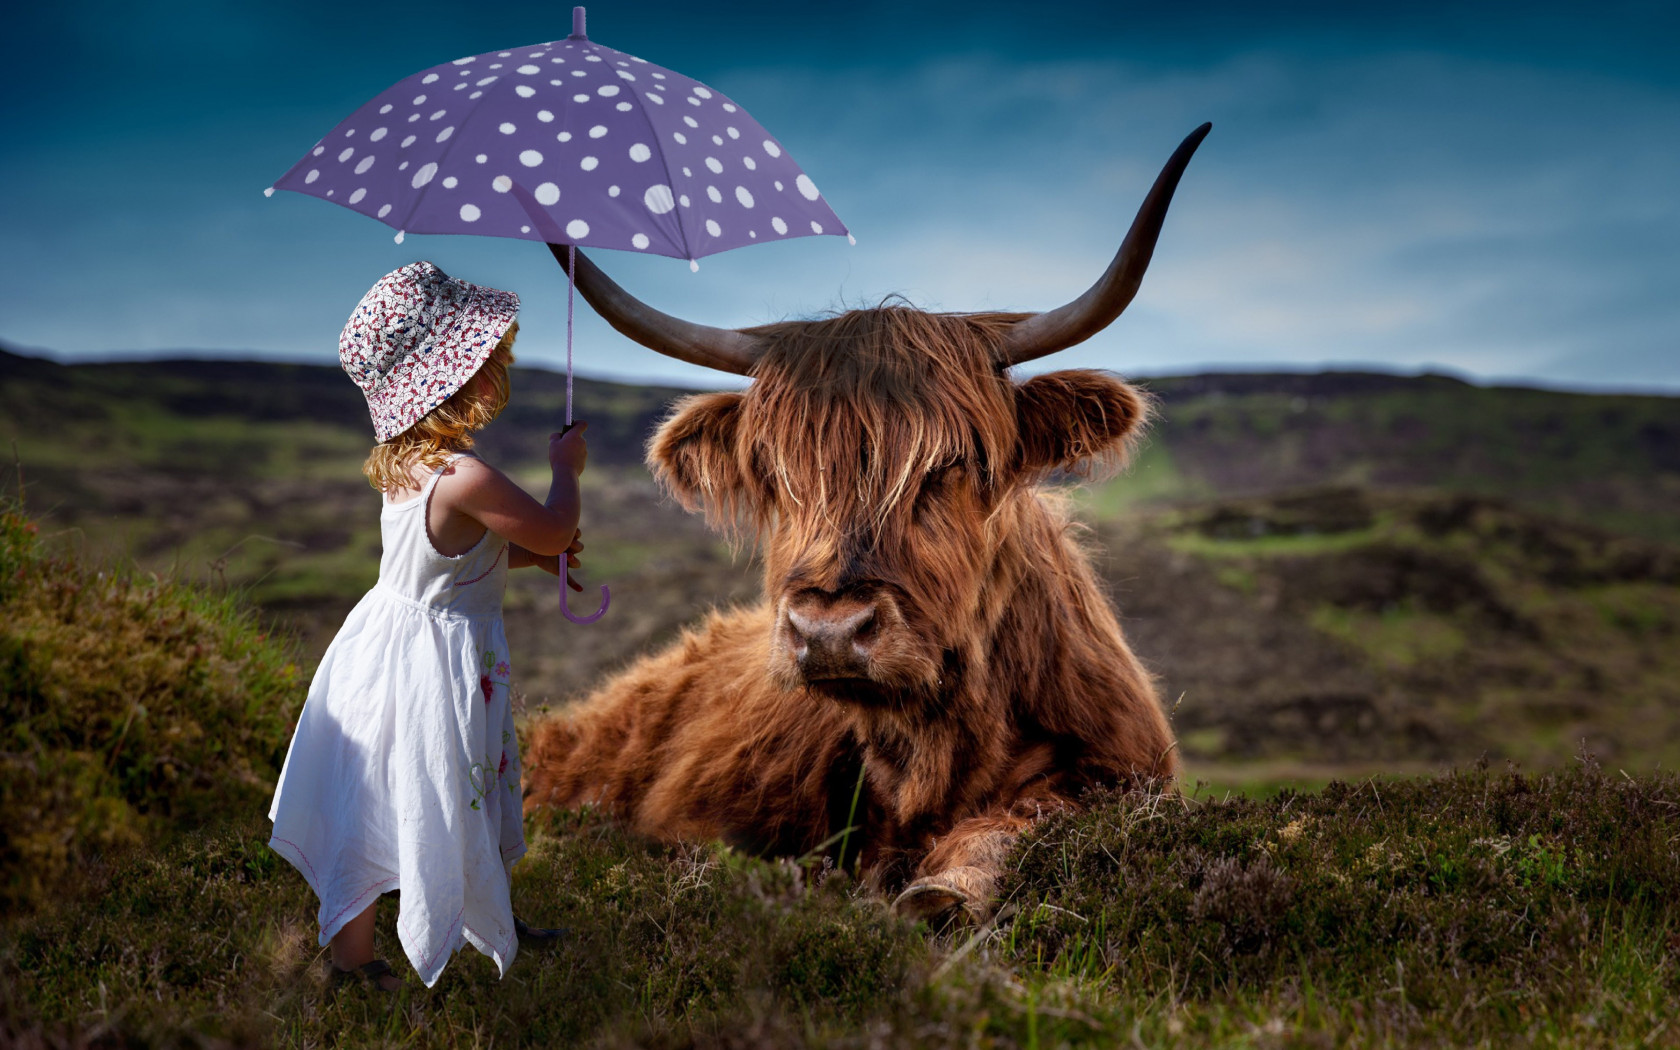 Child with the umbrella and the funny cow wallpaper 1680x1050